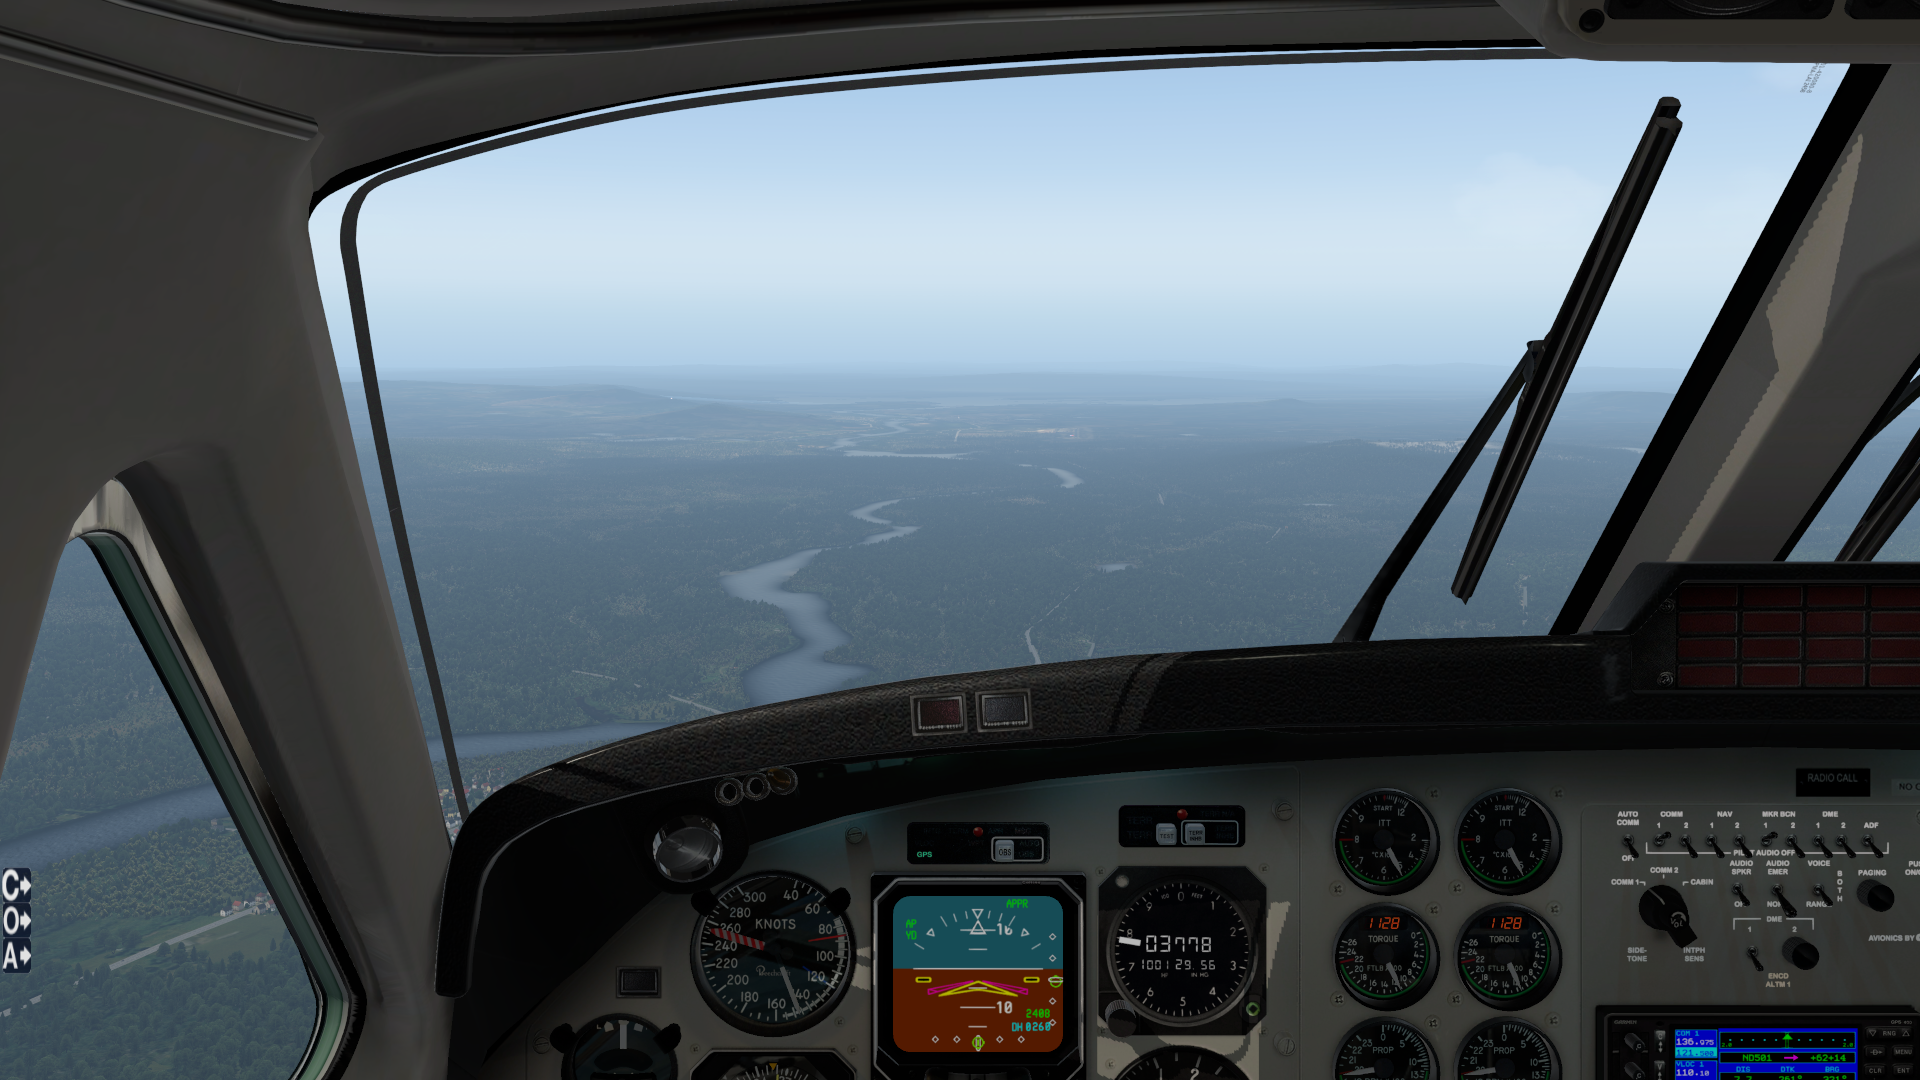 1620102862_Car_B200_King_Air-2022-05-2516_23_08.png.13a9d8797c9d5daefcaccf8e2667fd01.png